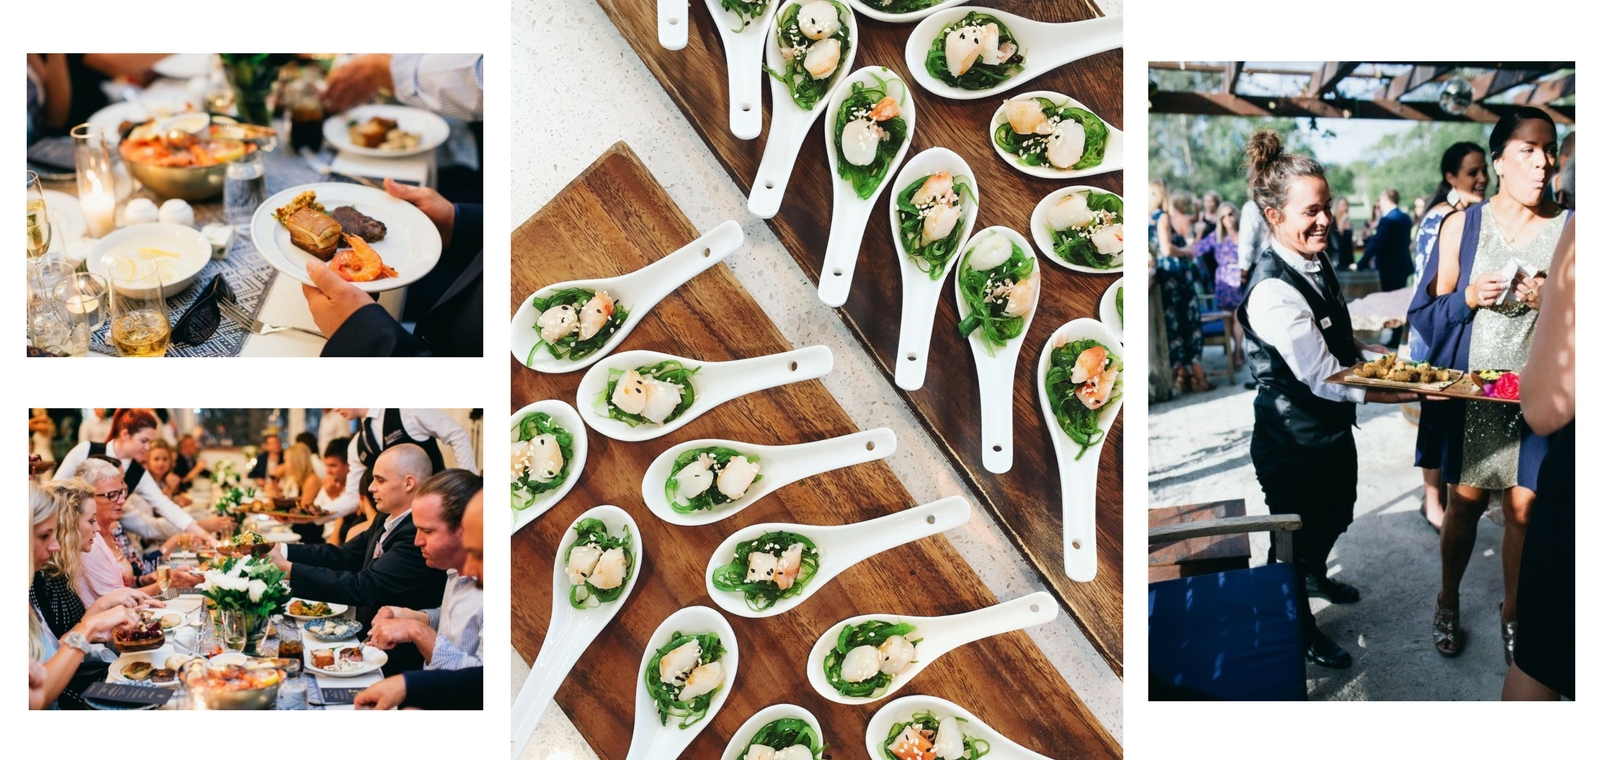 Australian Catering Services - Brisbane's Best Caterers